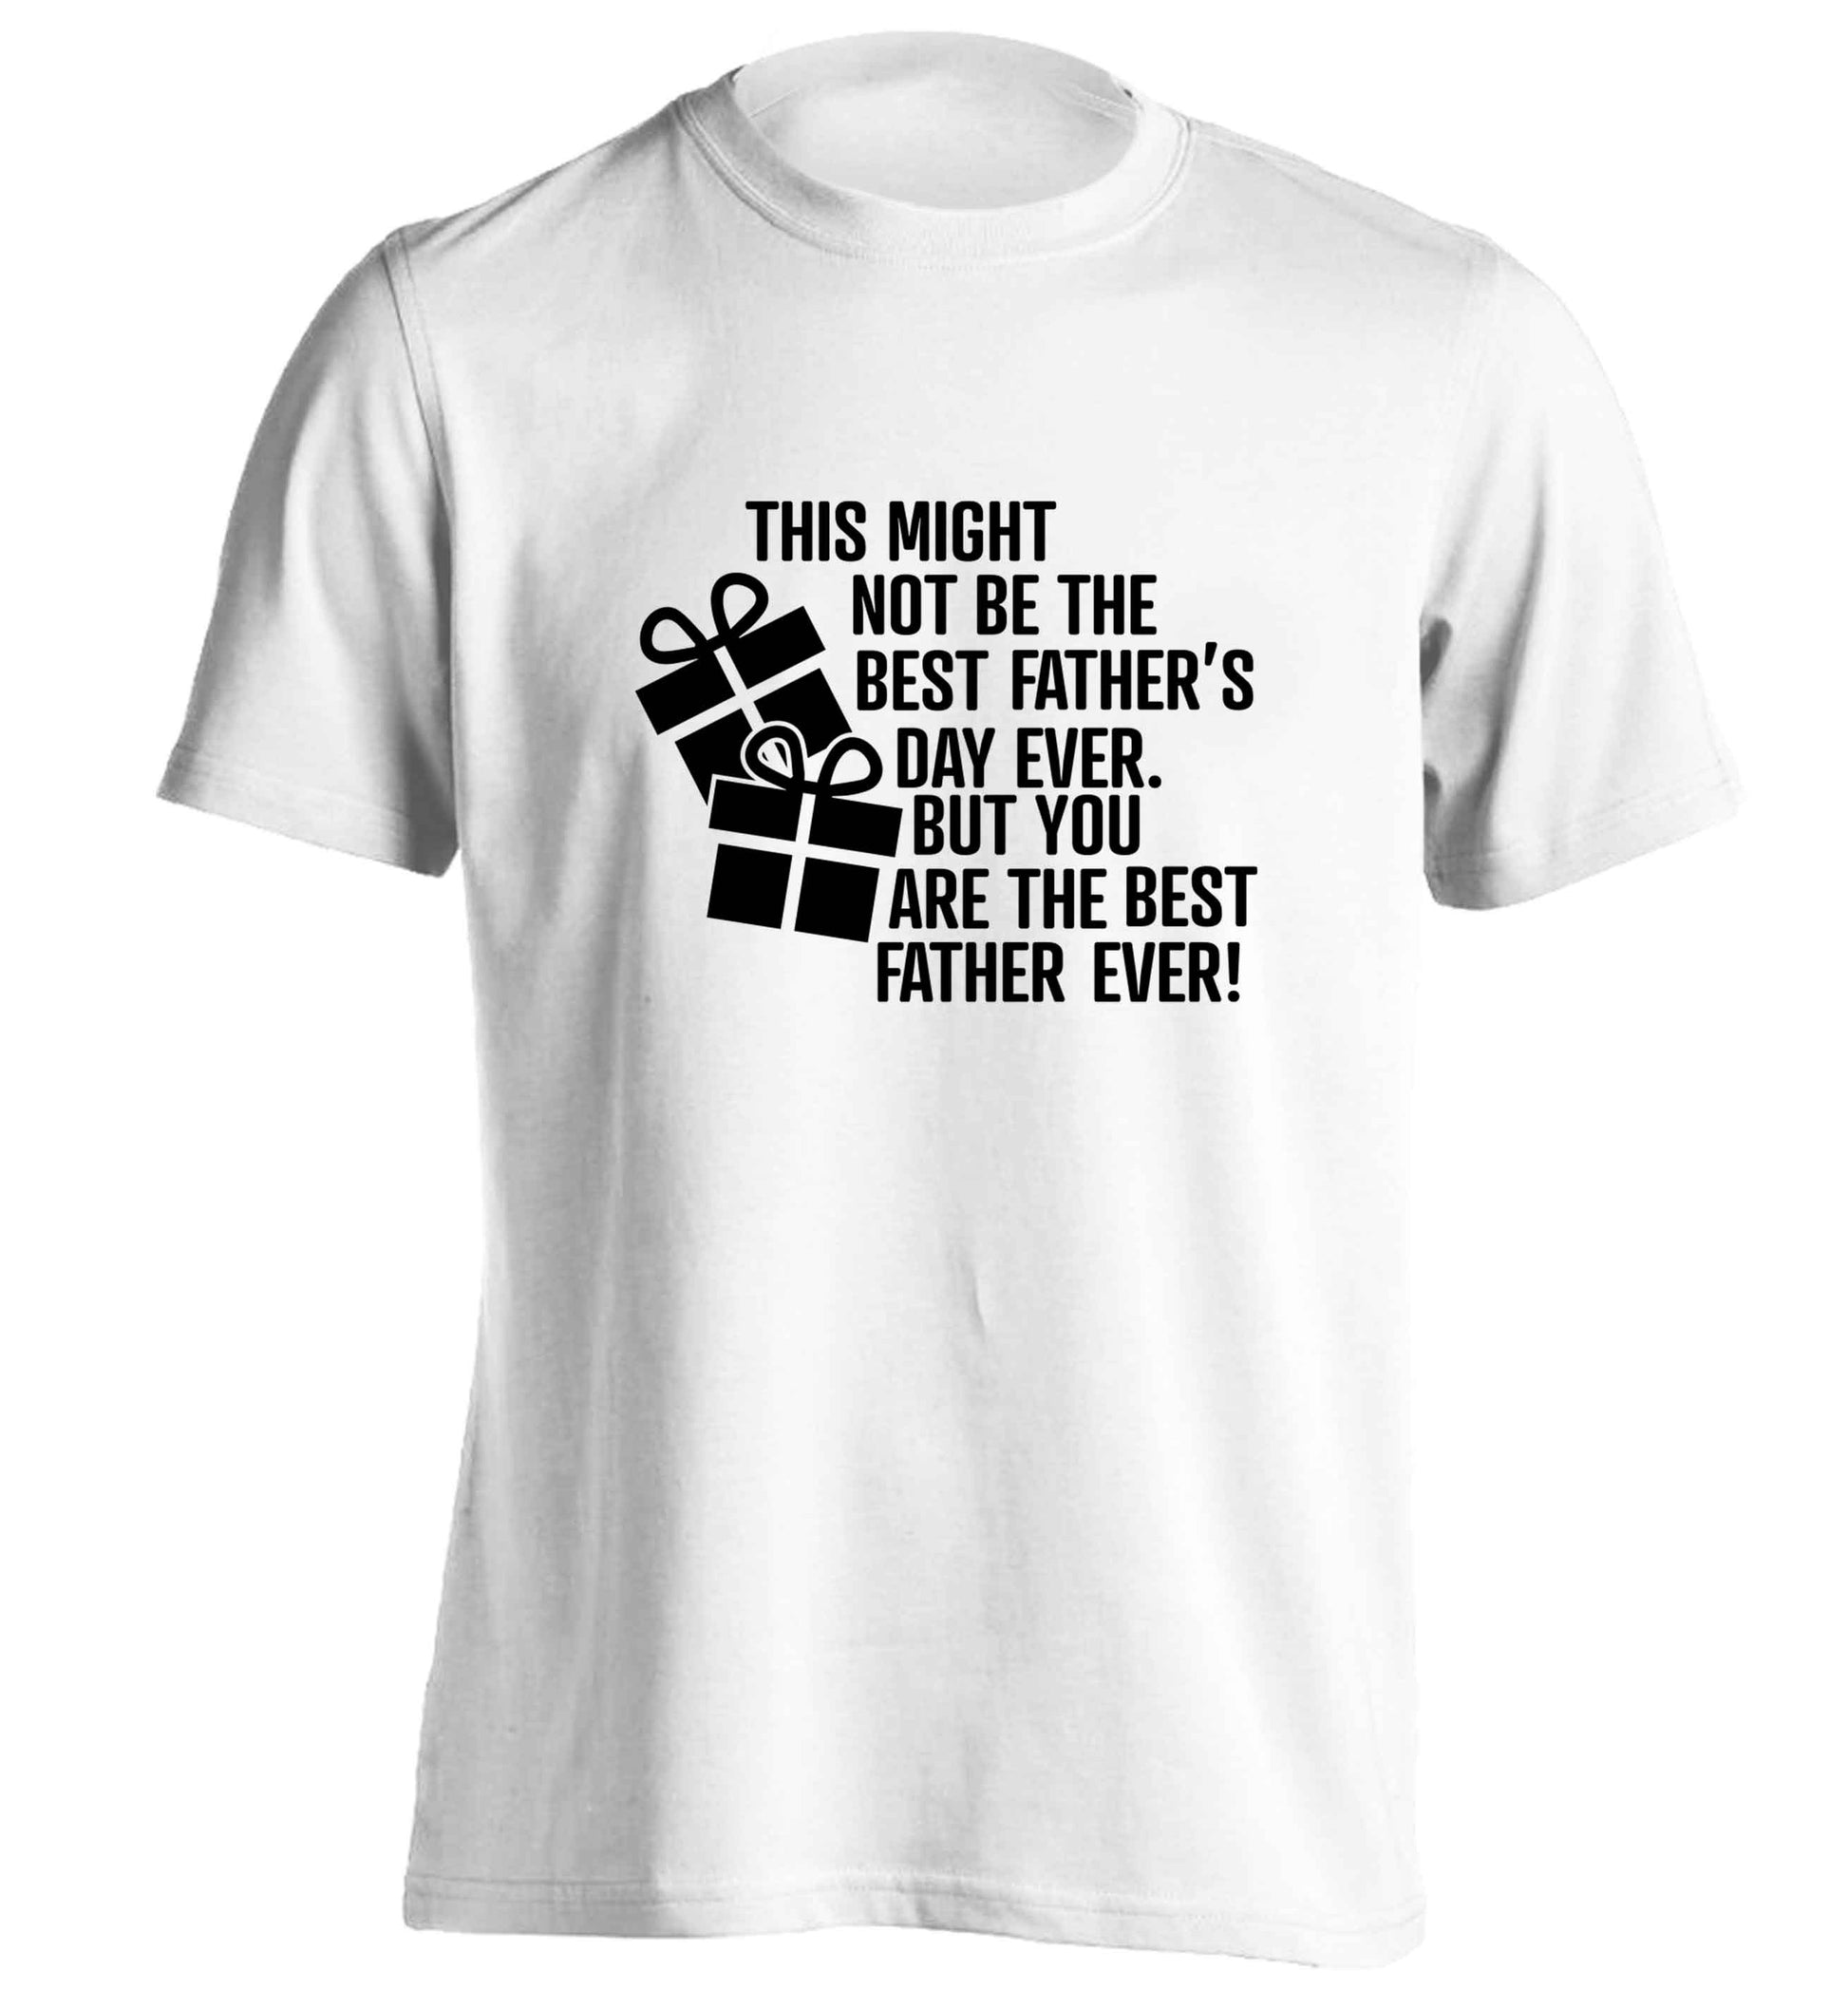 It might not be the best Father's Day ever but you are the best father ever! adults unisex white Tshirt 2XL